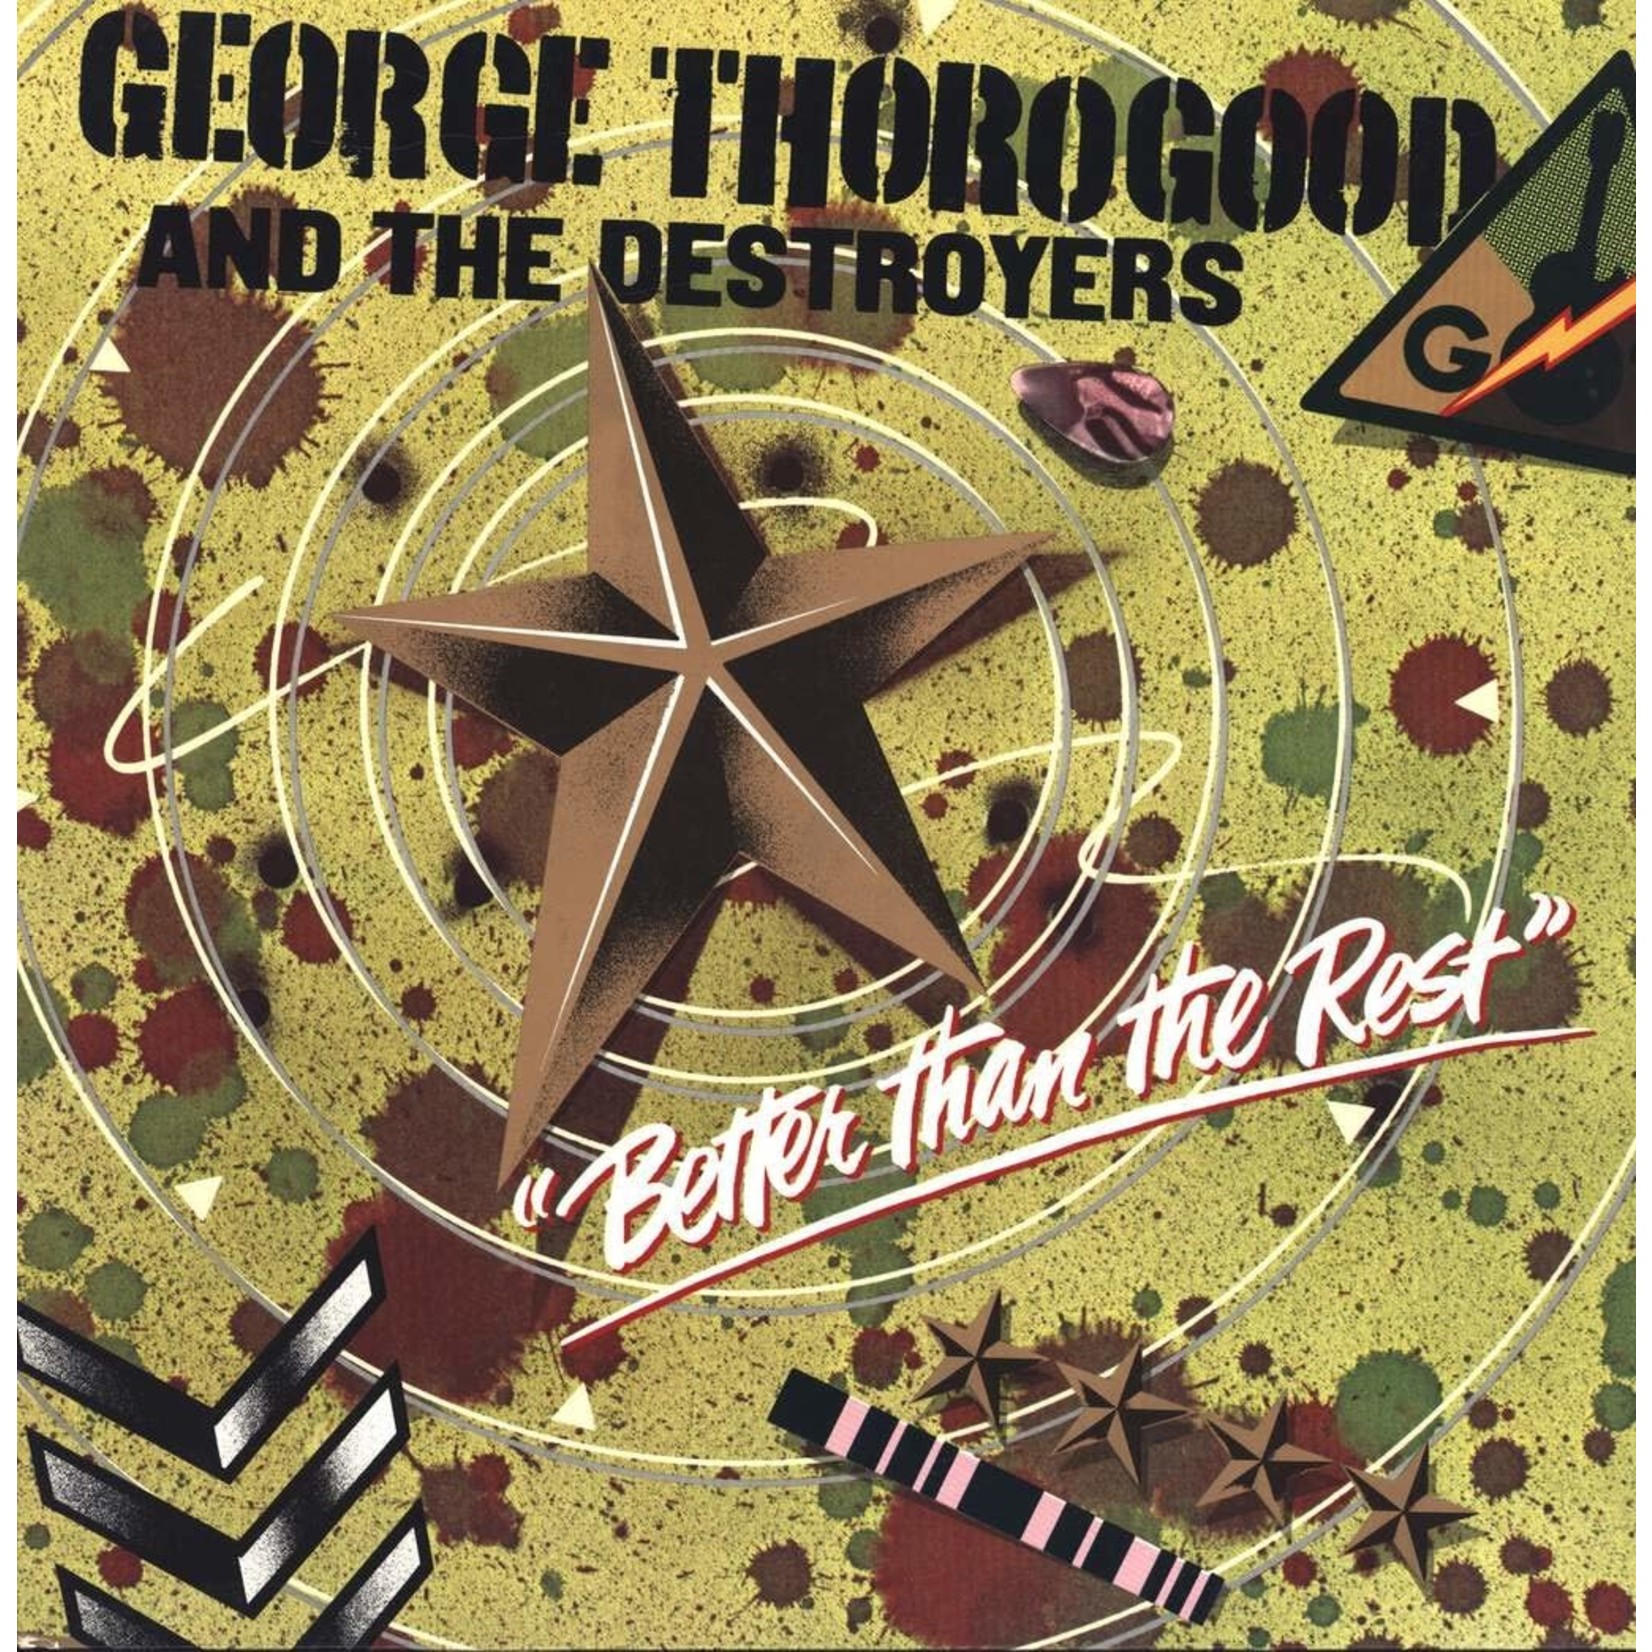 [Vintage] George Thorogood - Better Than the Rest